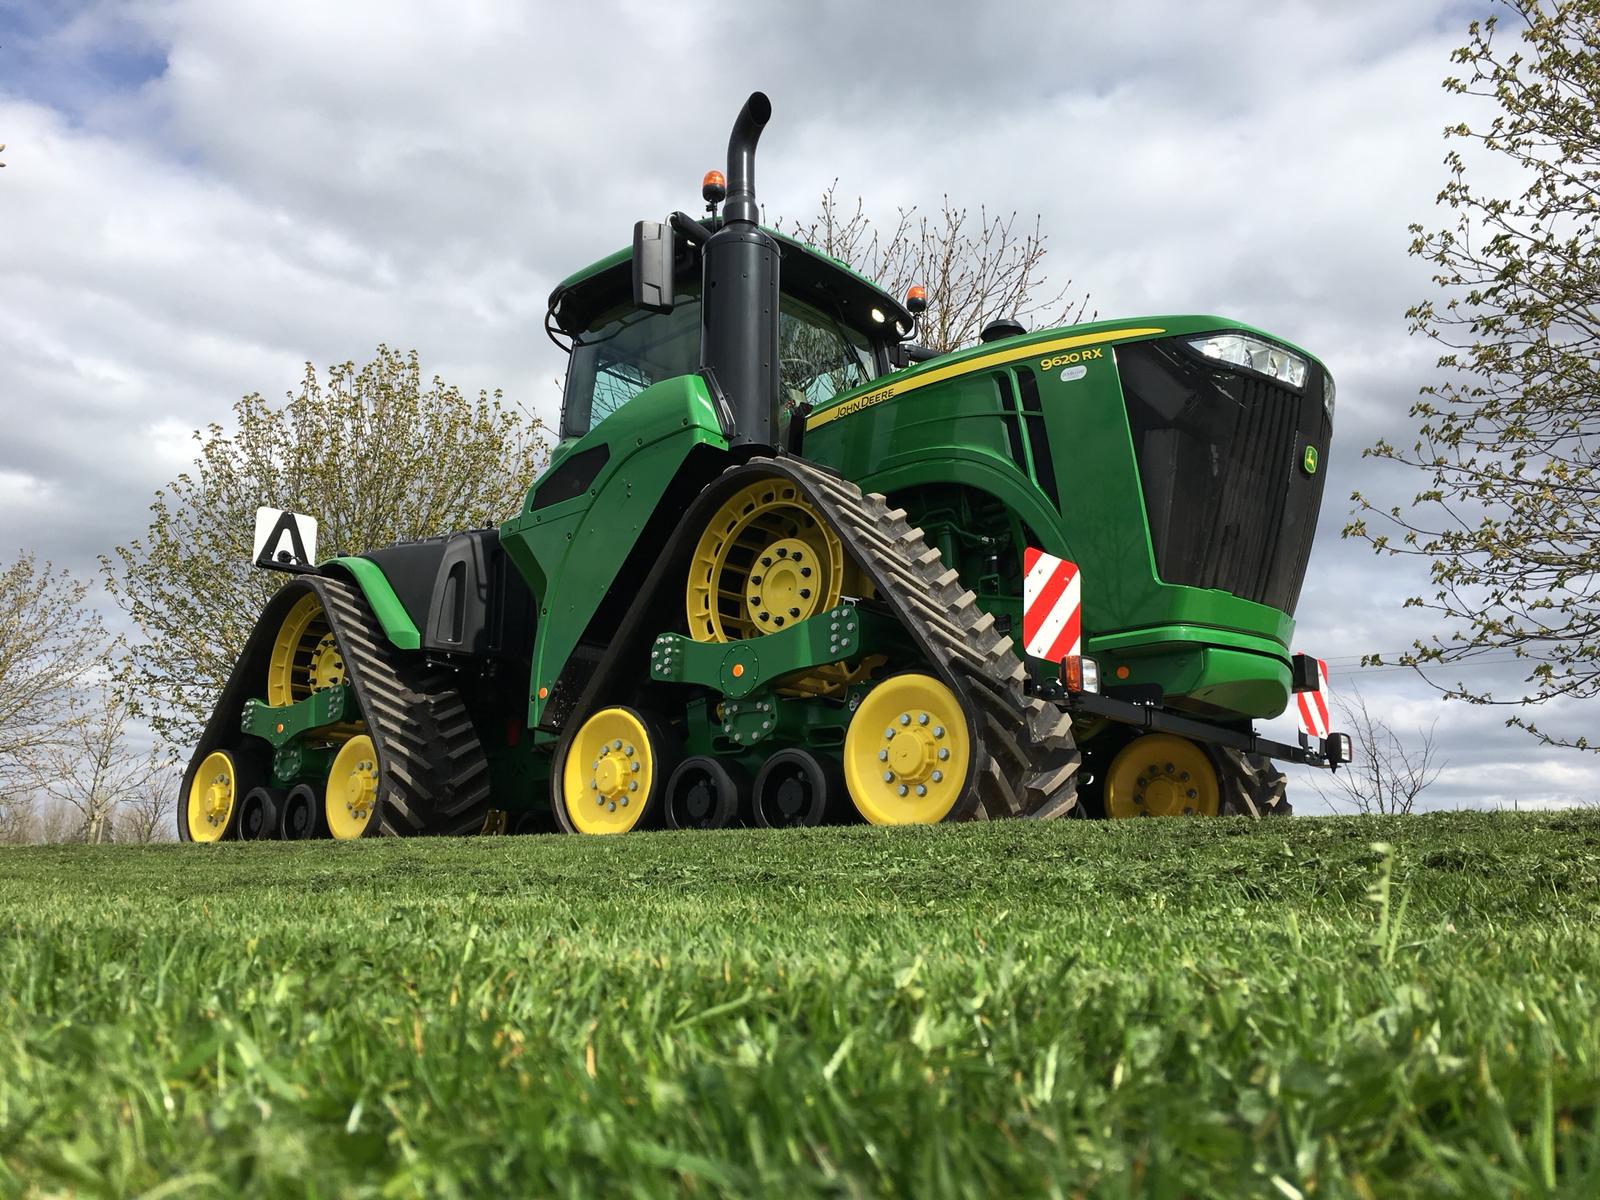 Doubleday Group brand new John Deere 9RX was recently delivered to its new home ready to get stuck in and challenge the fields after all the rain